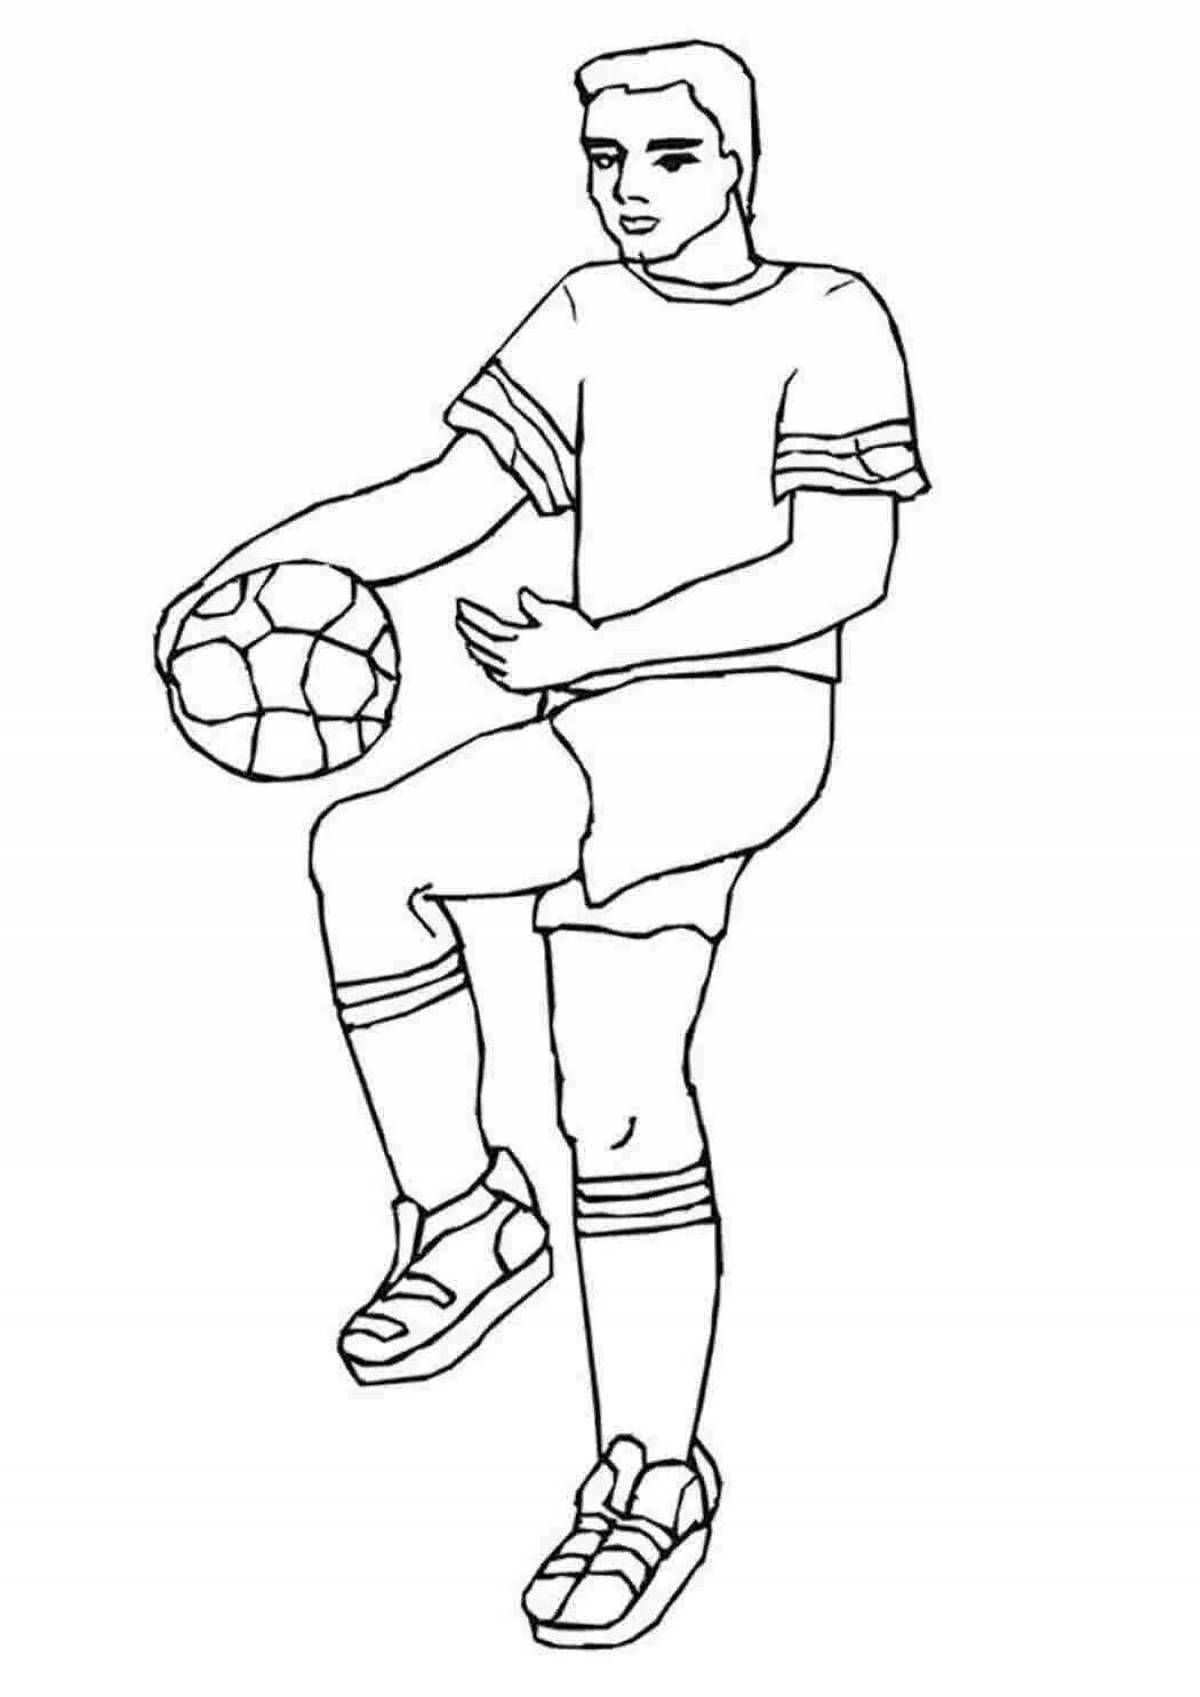 Coloring page dynamic football players